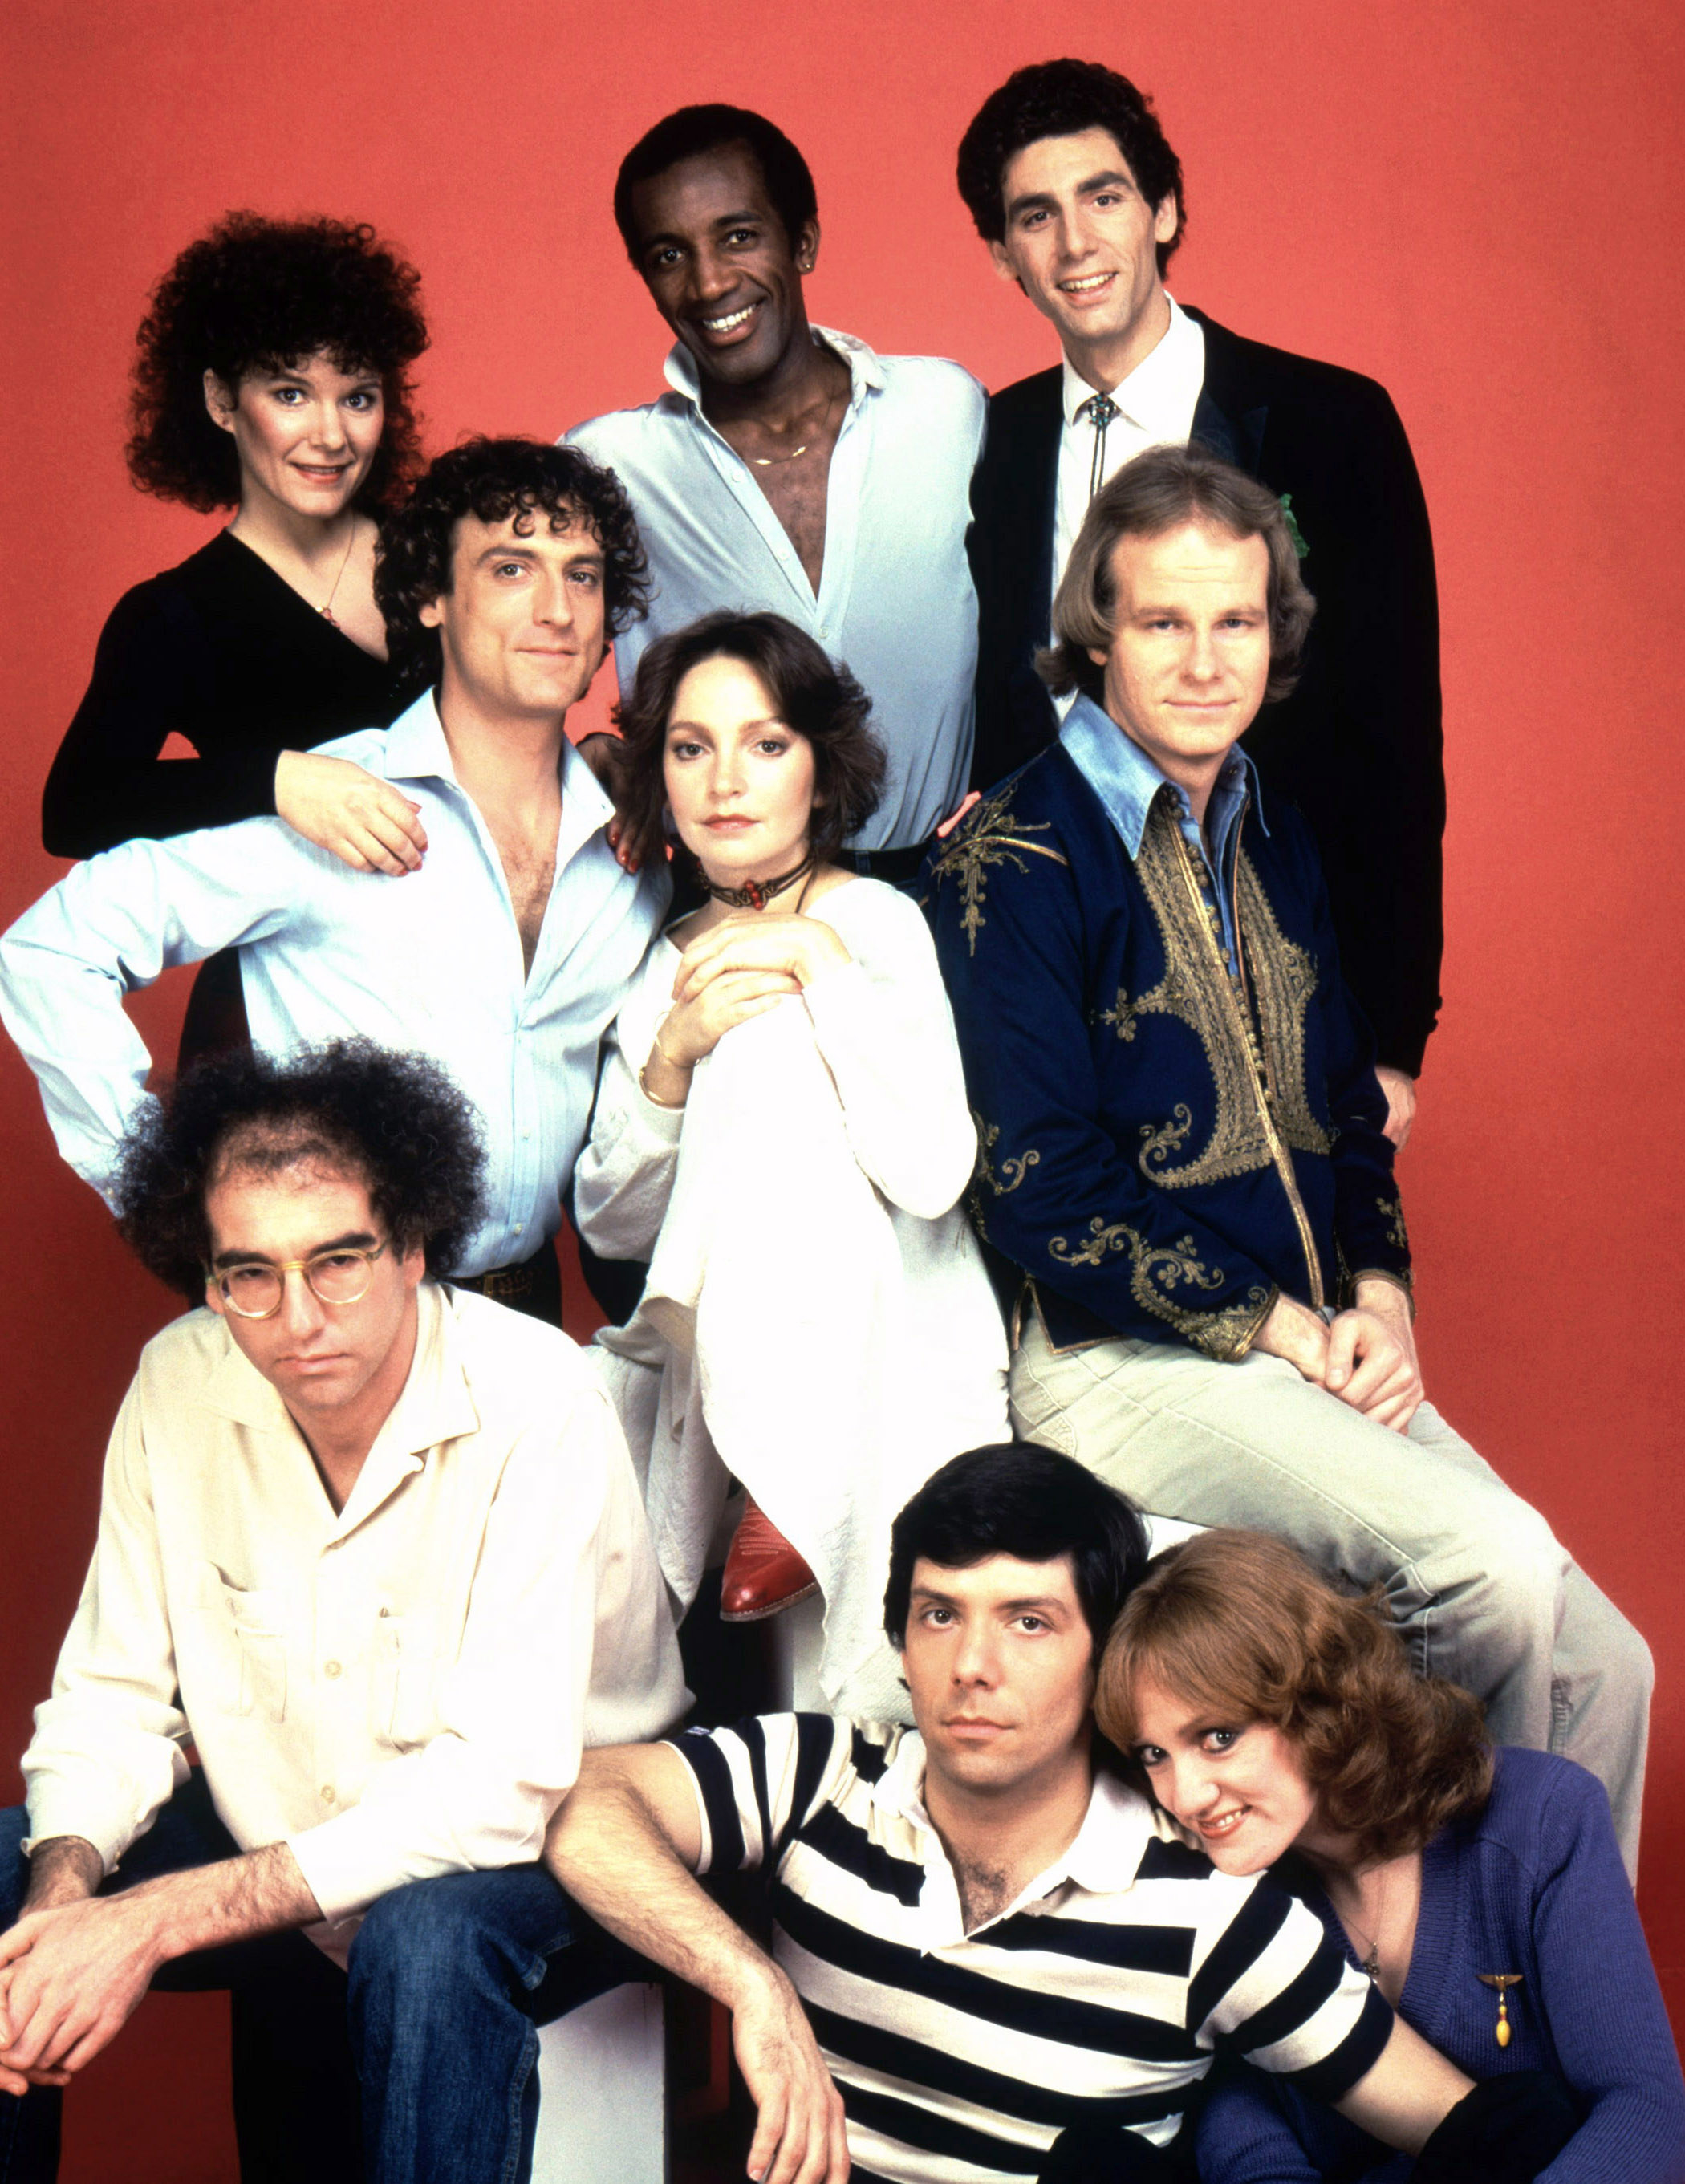 the cast of the show